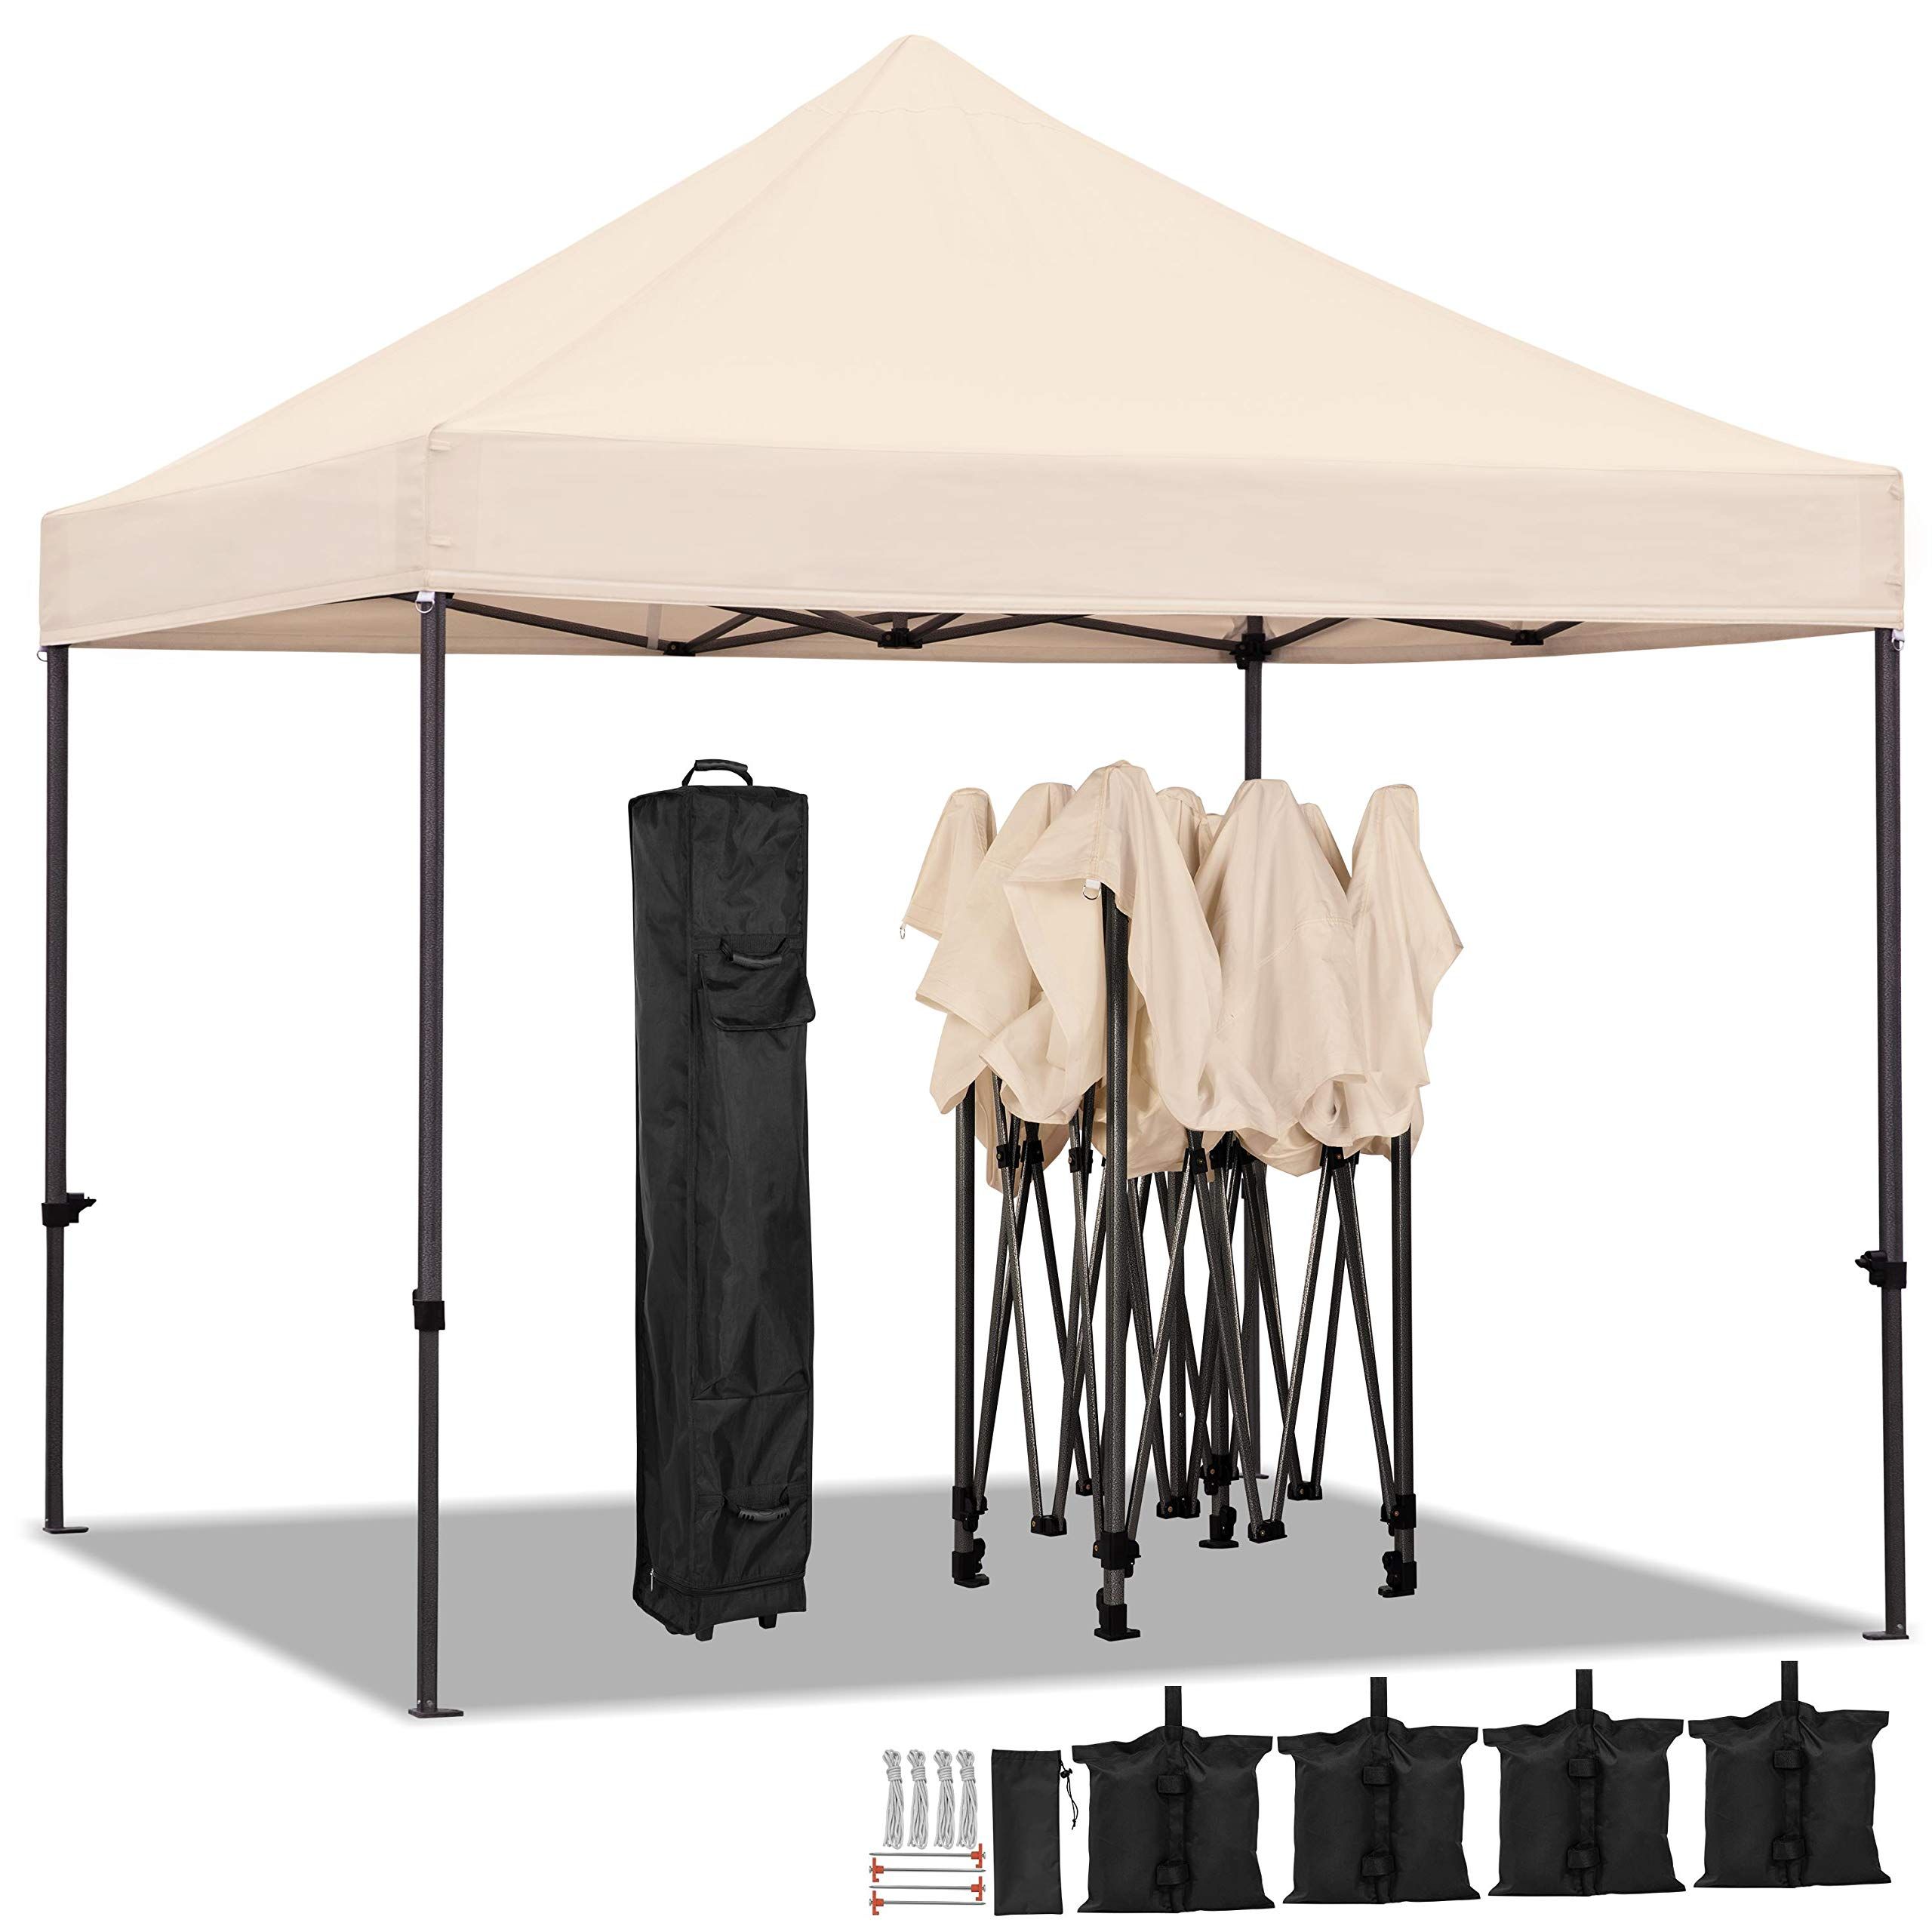 Yaheetech 10x10 Pop up Canopy Tent - Heavy Duty Waterproof Adjustable Commercial Instant Canopy, Cam | Amazon (US)